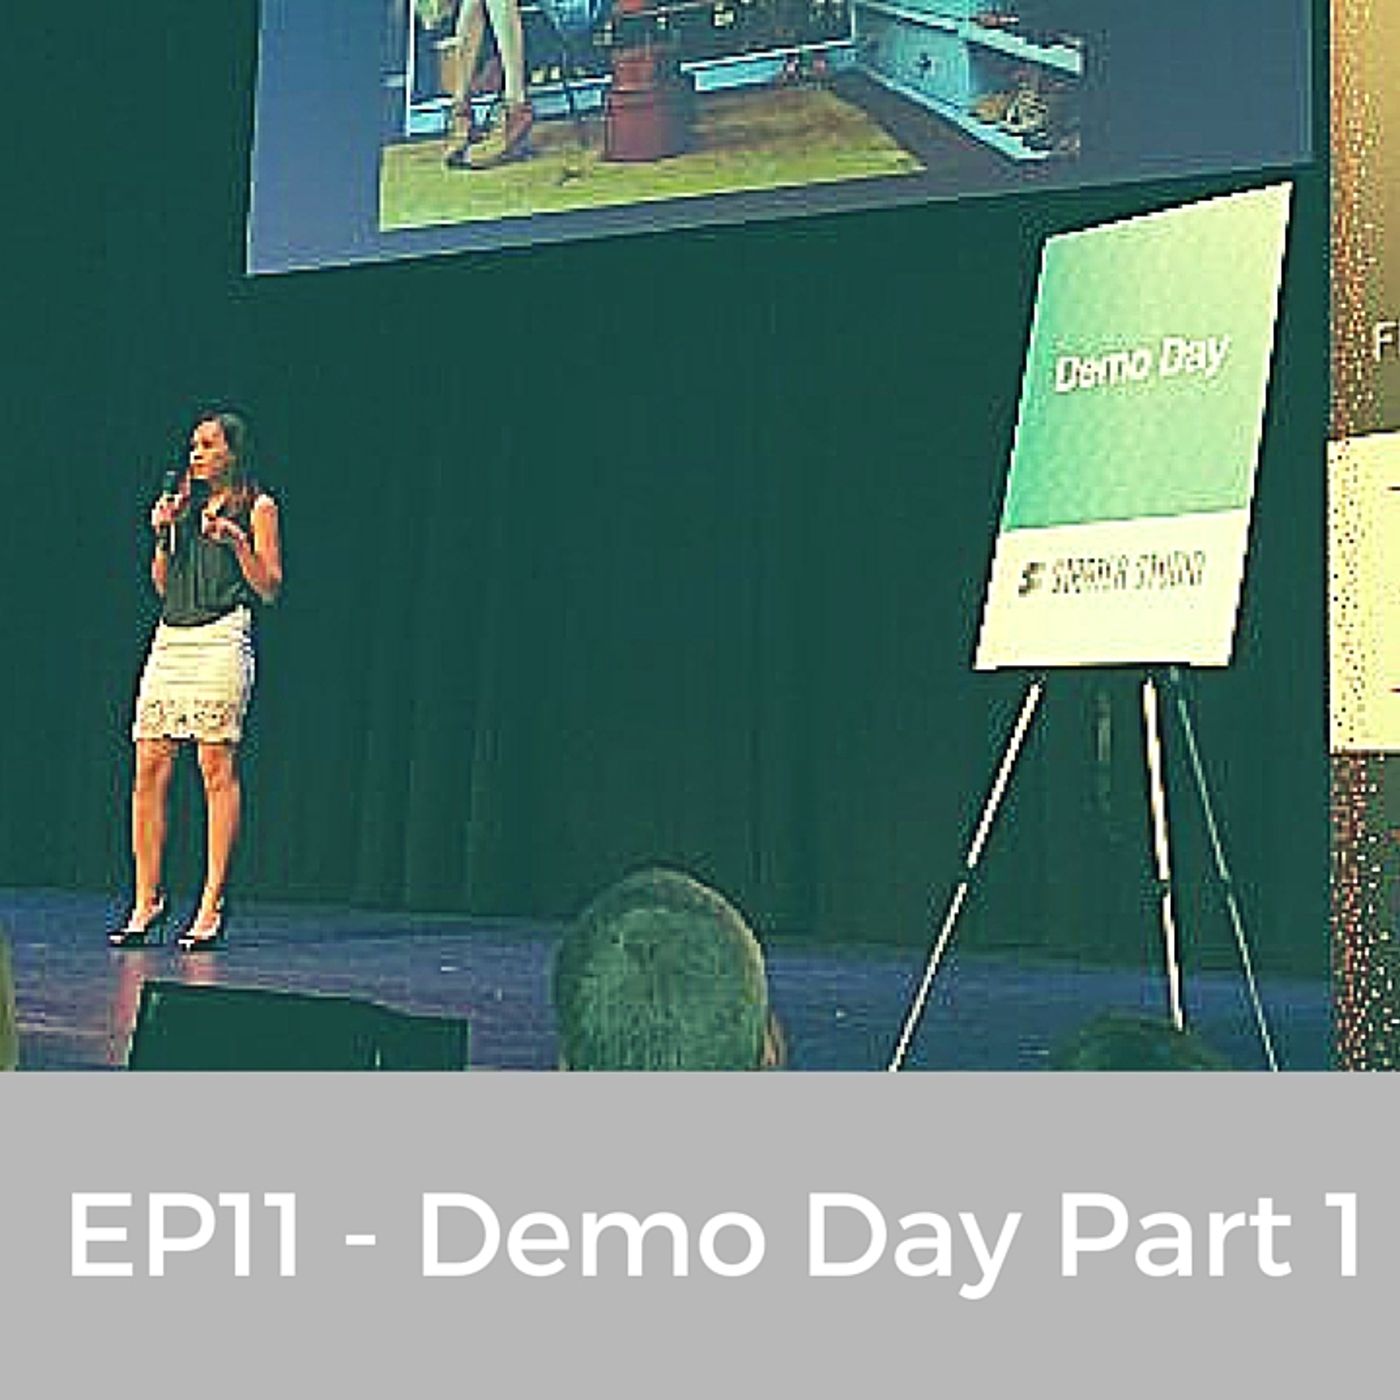 EP11 - Demo Day Part 1